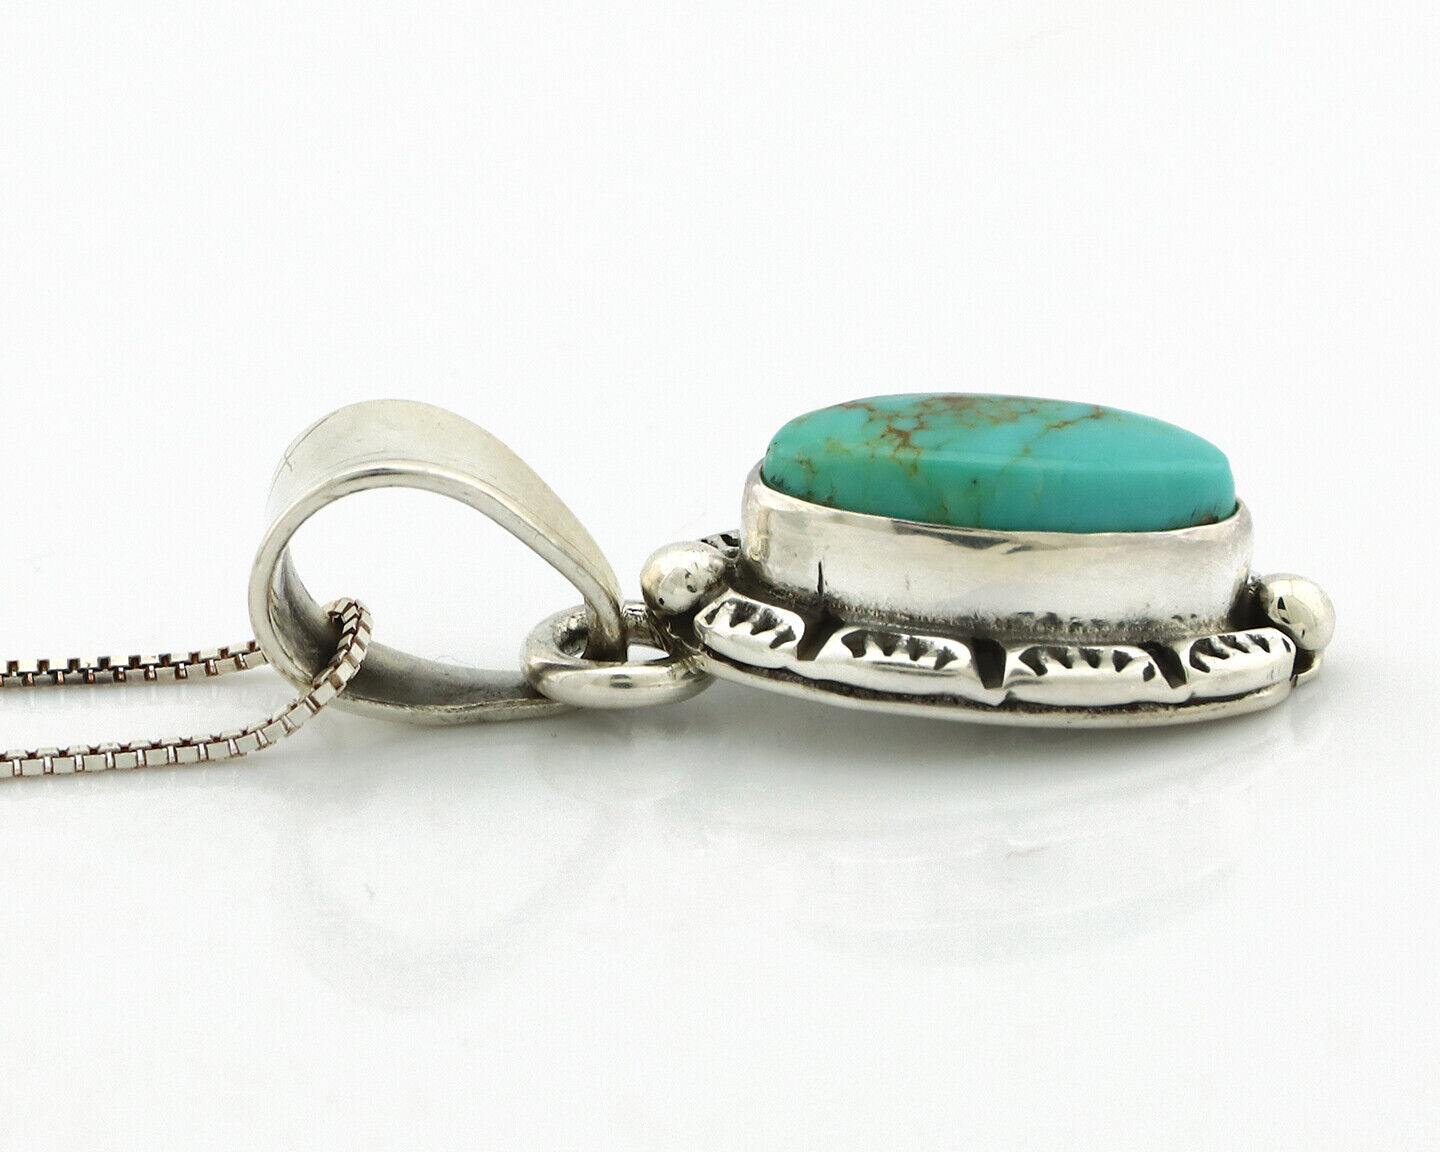 Navajo Necklace 925 Silver Kingman Turquoise Artist Signed Gecko C.80's